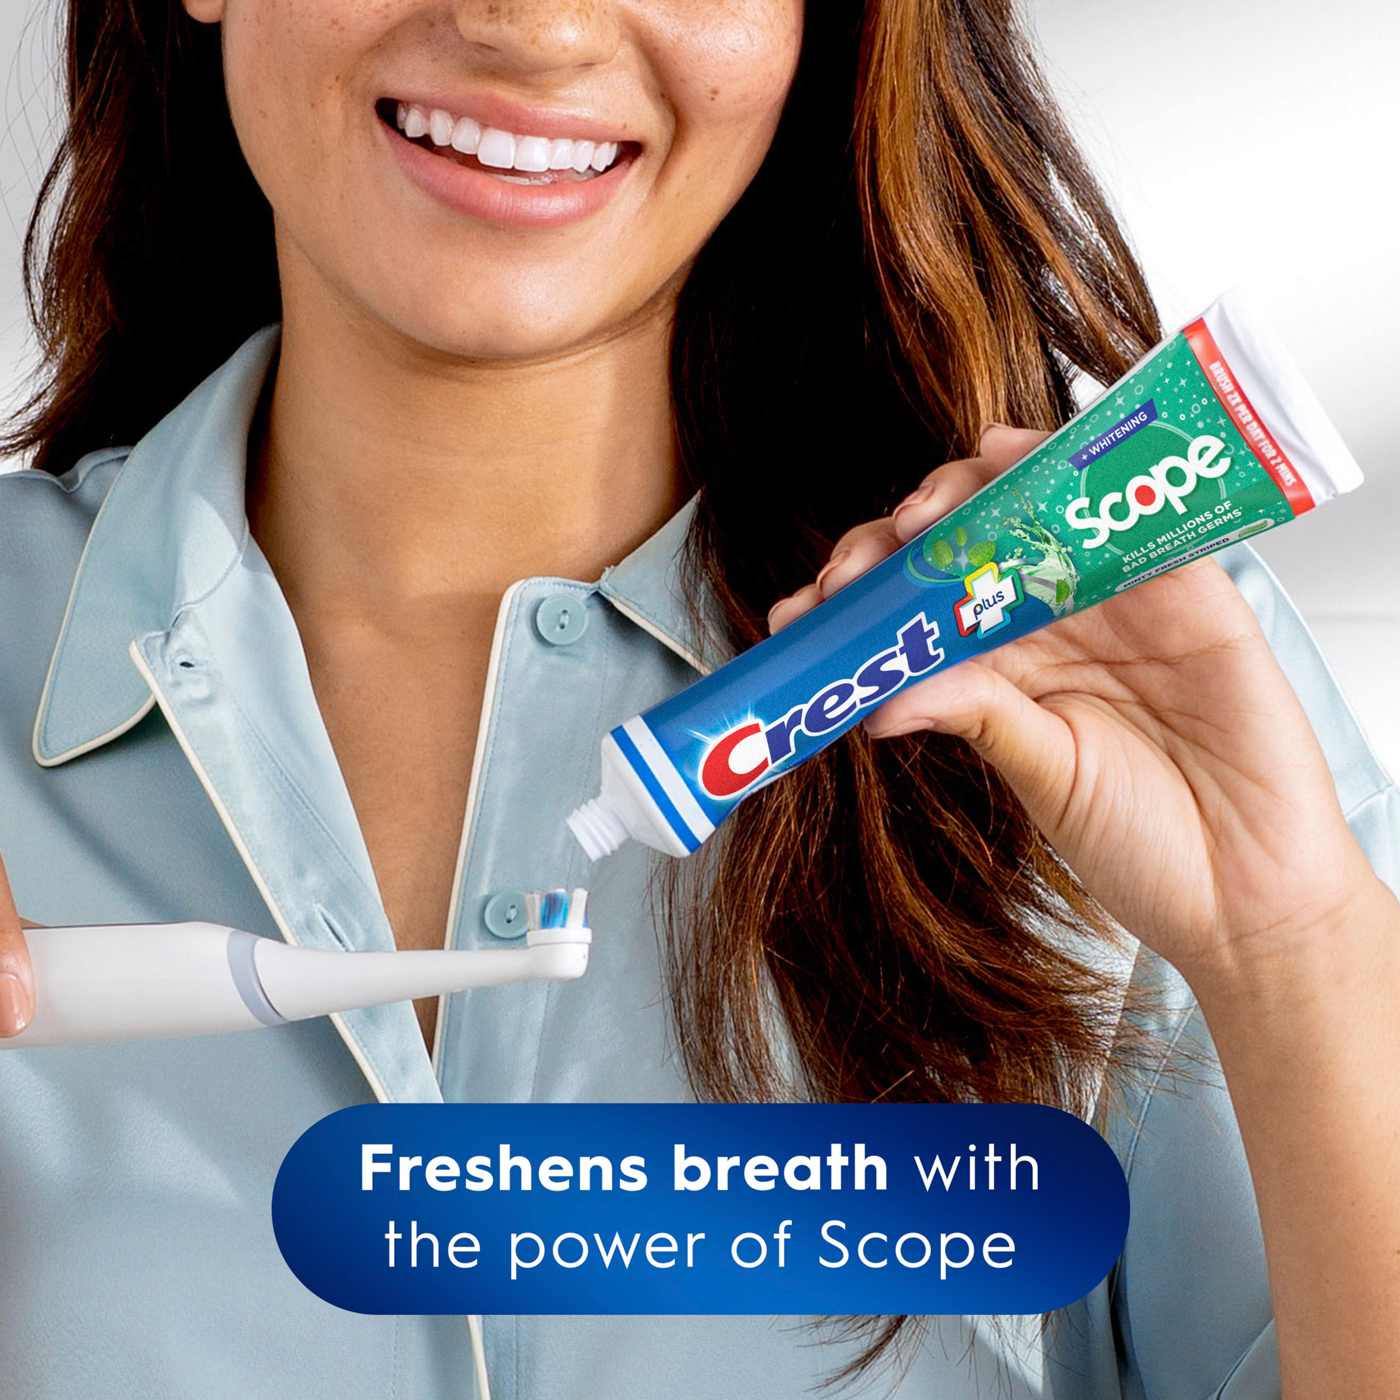 Crest Complete + Scope Whitening Toothpaste - Minty Fresh Striped, 2 Pk; image 4 of 8